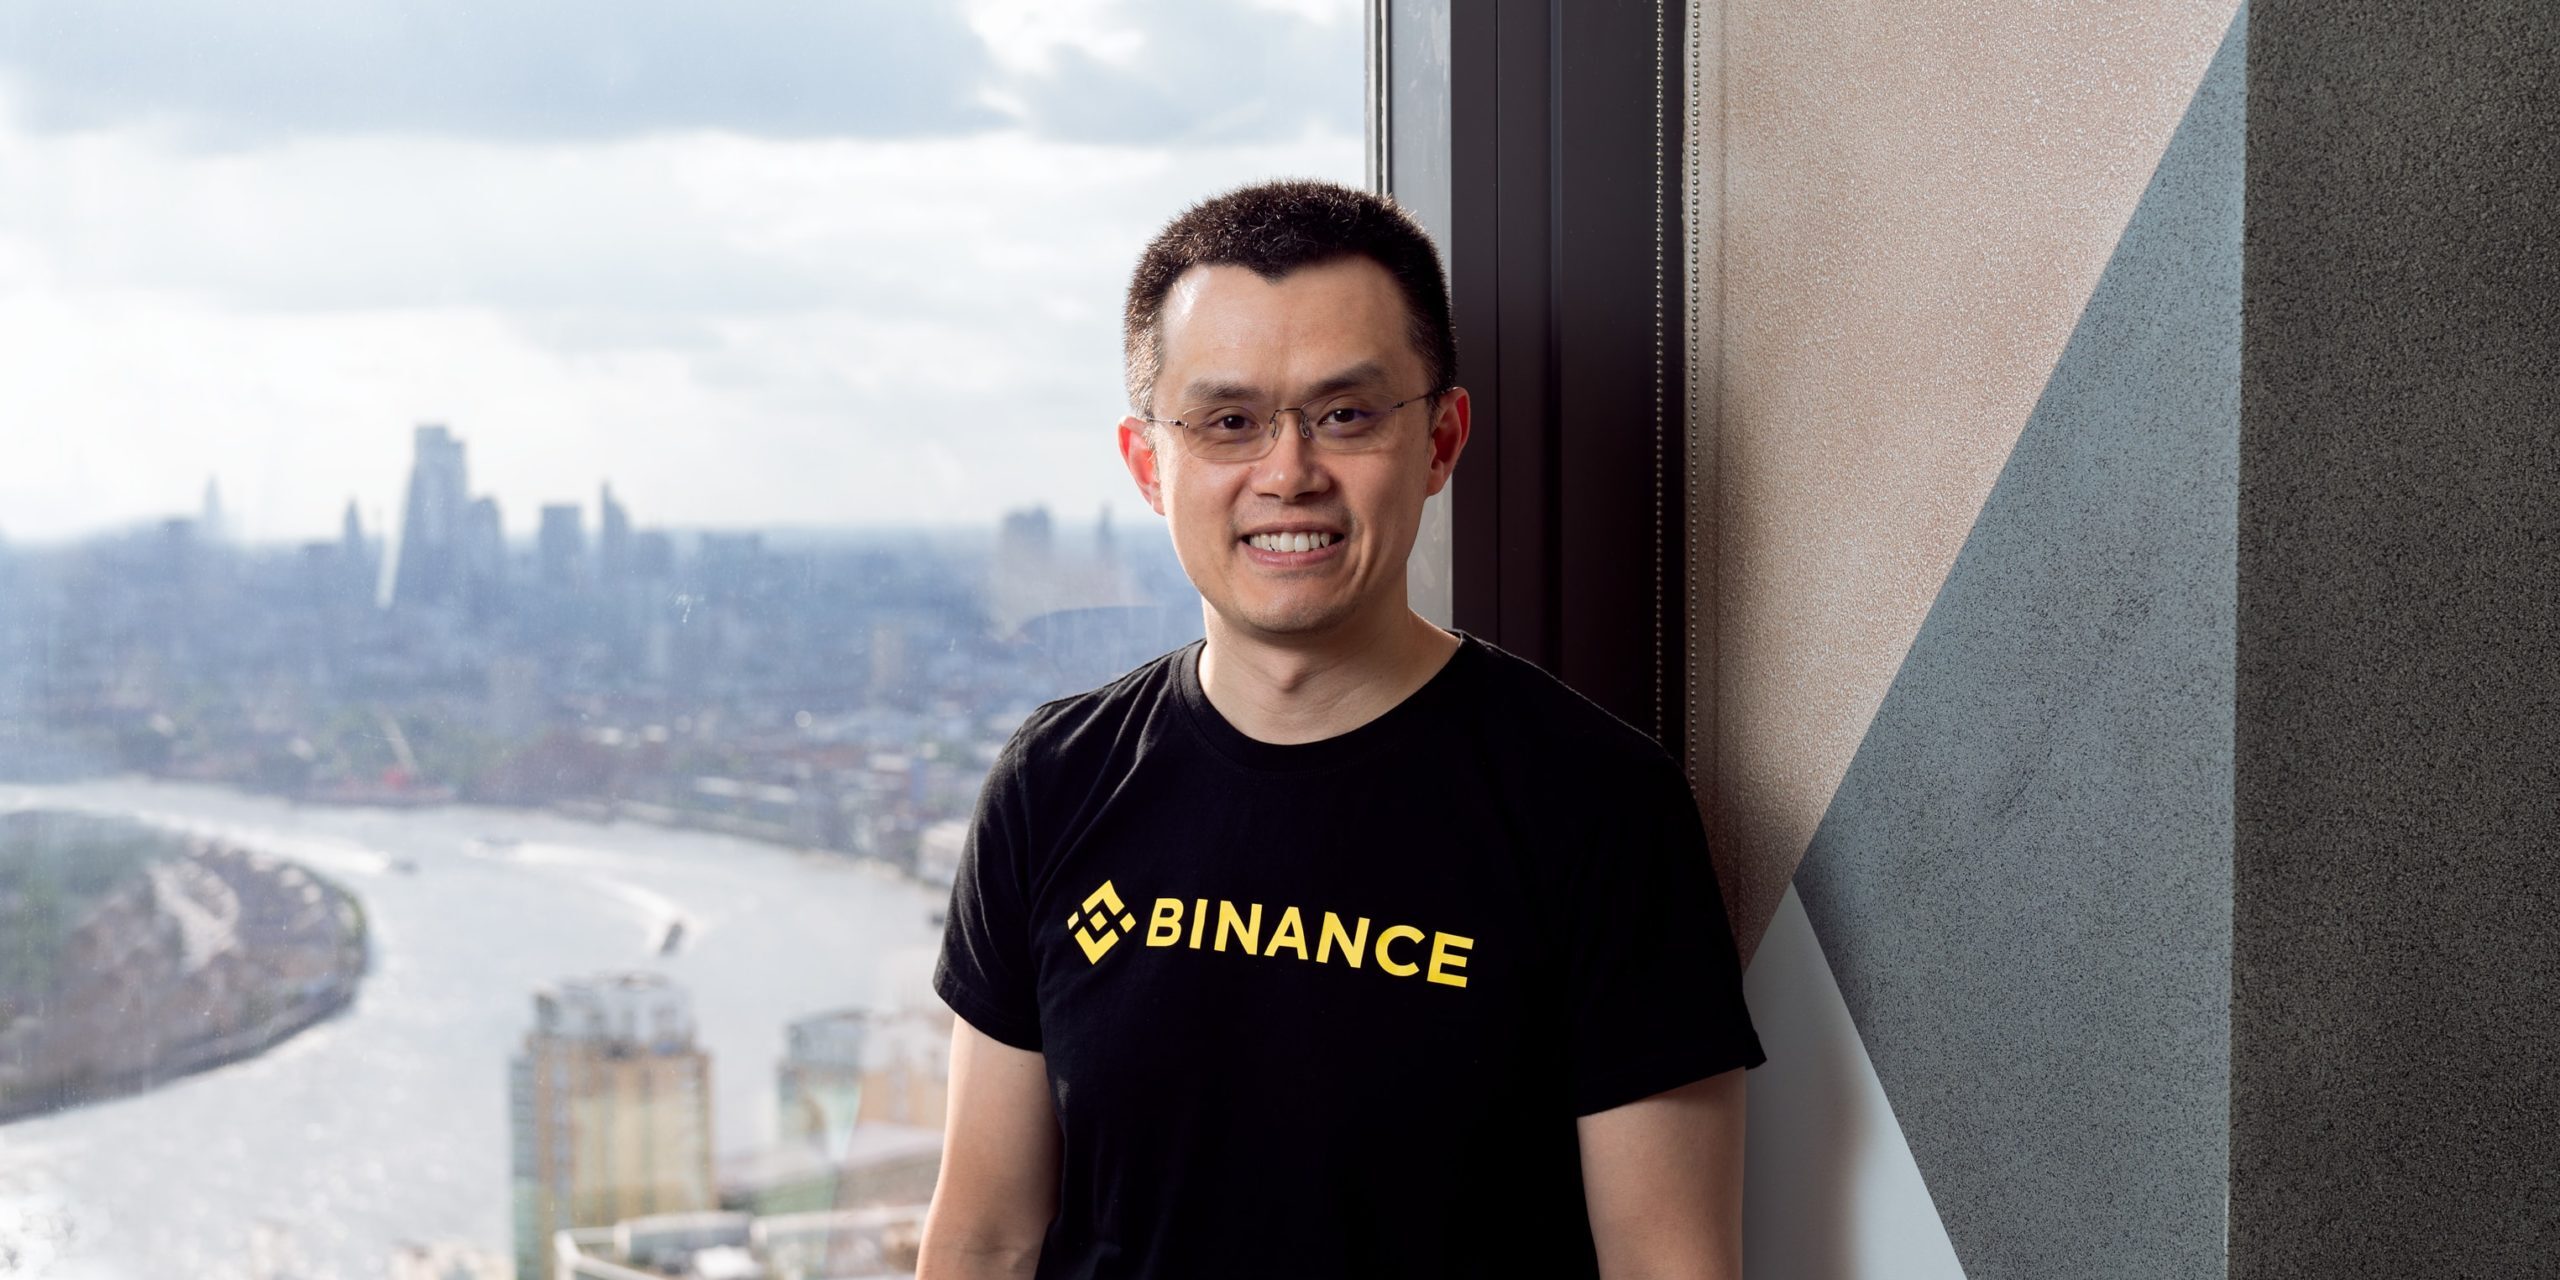 Binance Chief Says Former Russia Unit CommEx ‘Does Not Service US or EU Users’